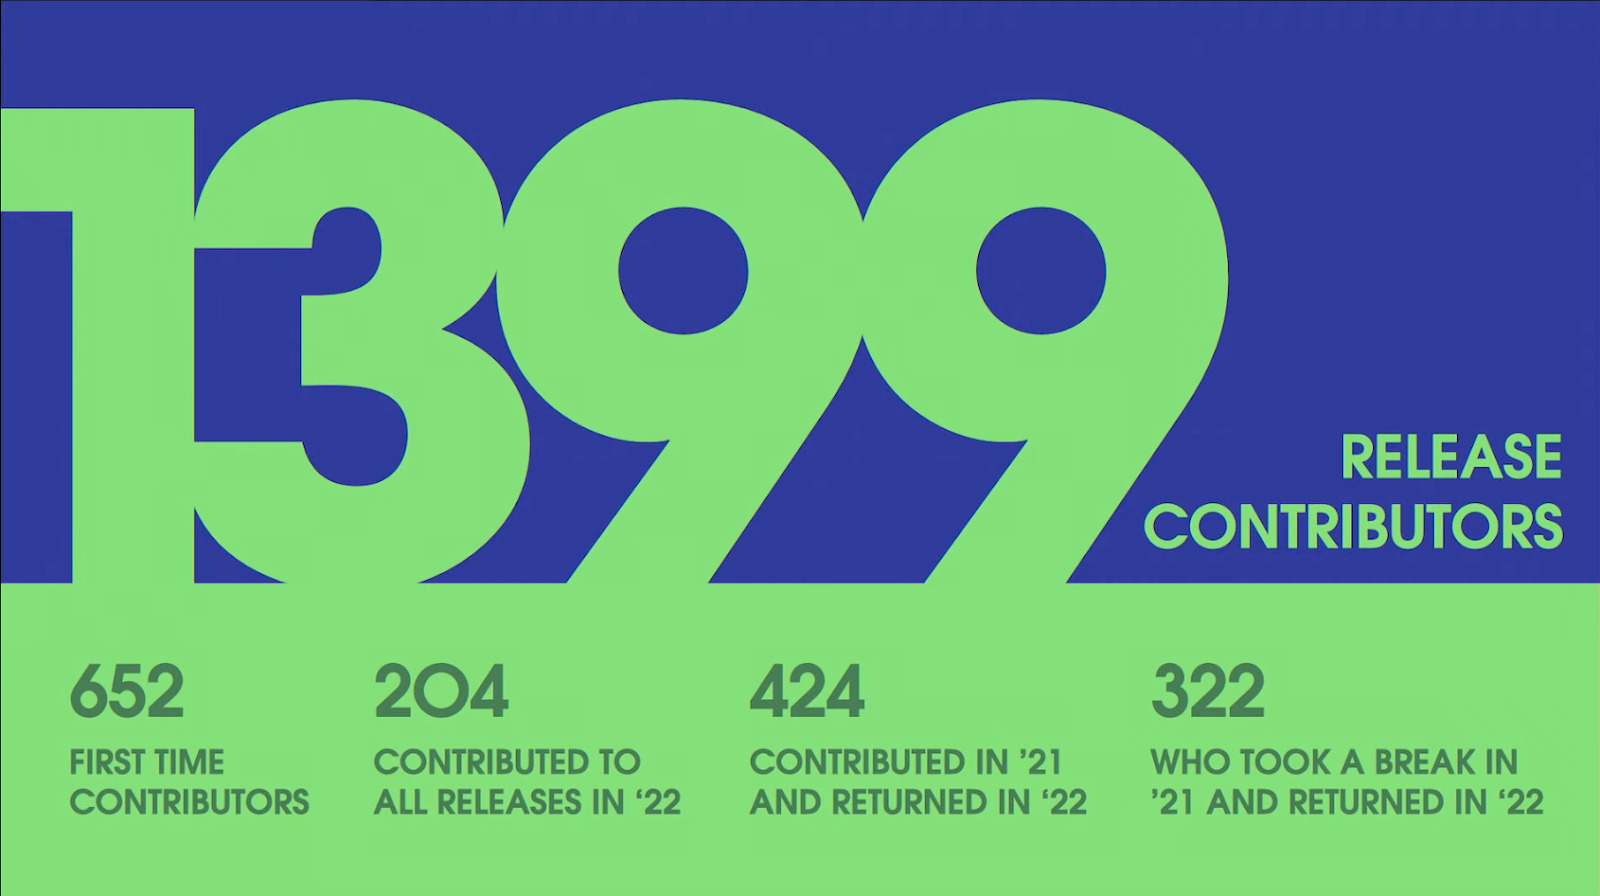 A graphic showing the number of release contributors in 2022, 1,399